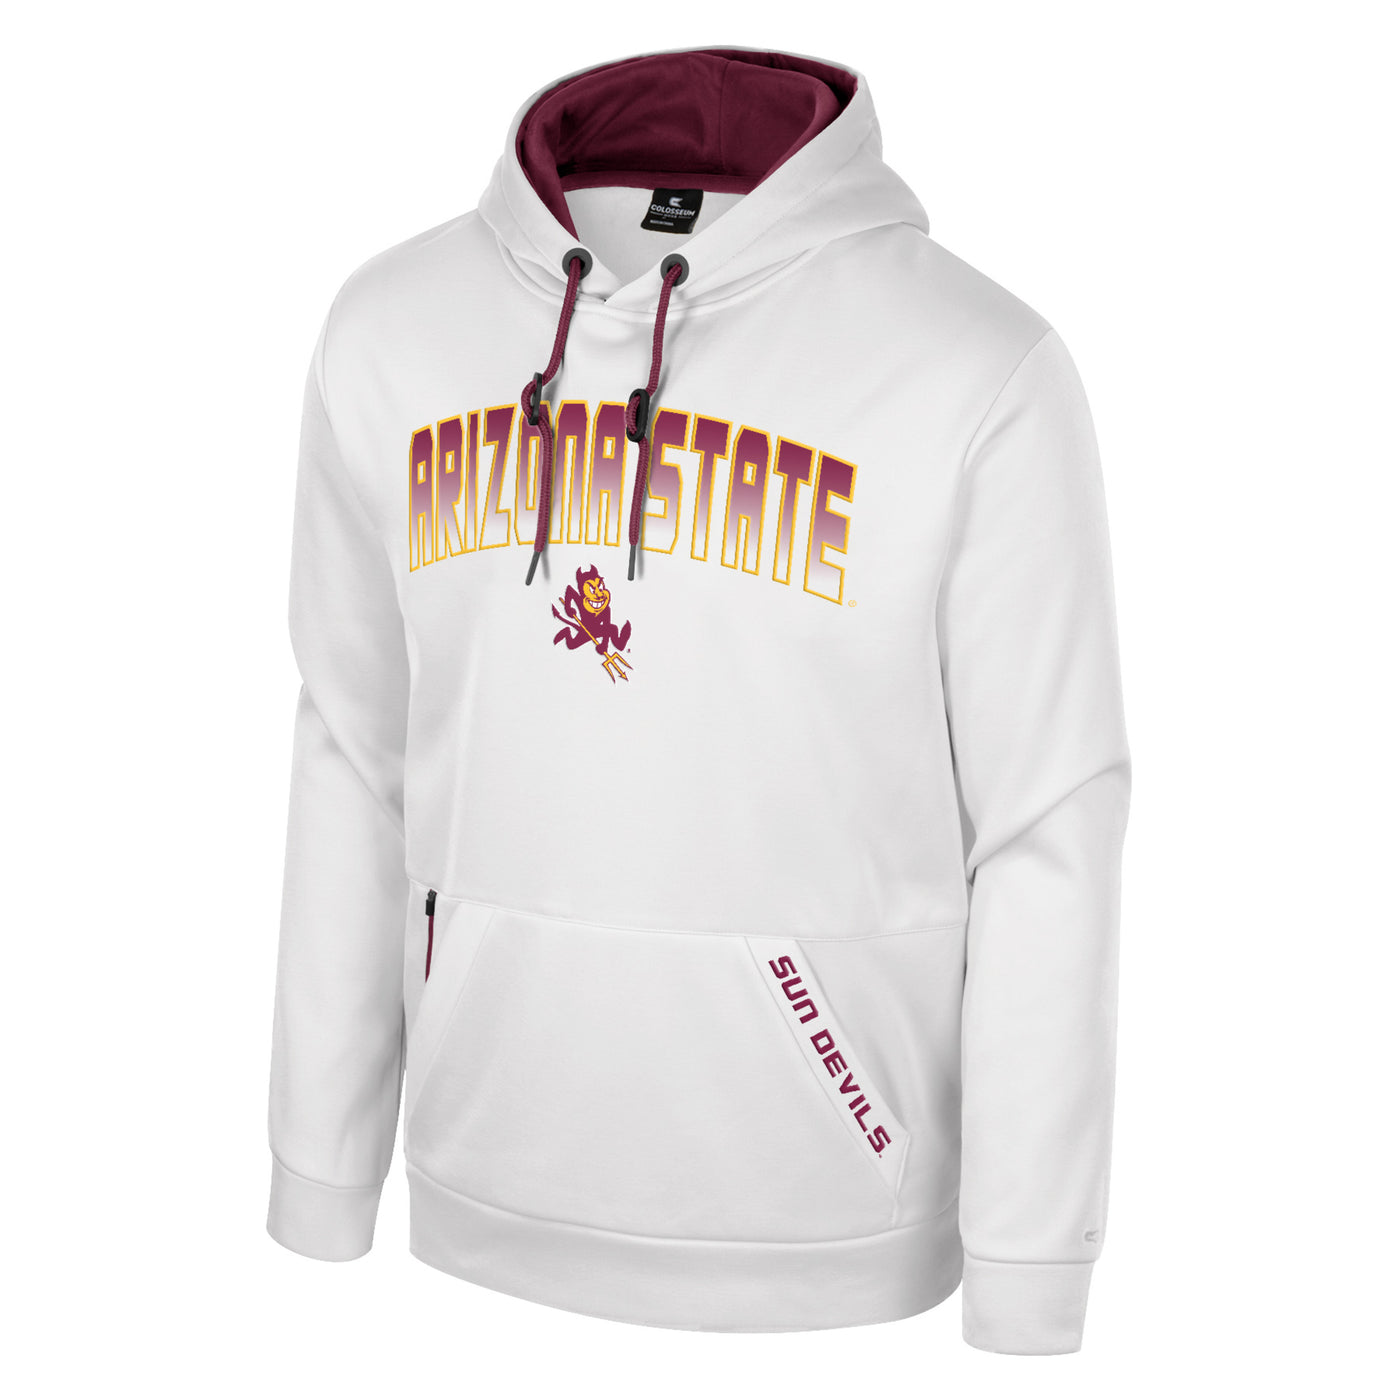 ASU white hoodie with maroon lined hood and maroon drawstrings. The maroon text 